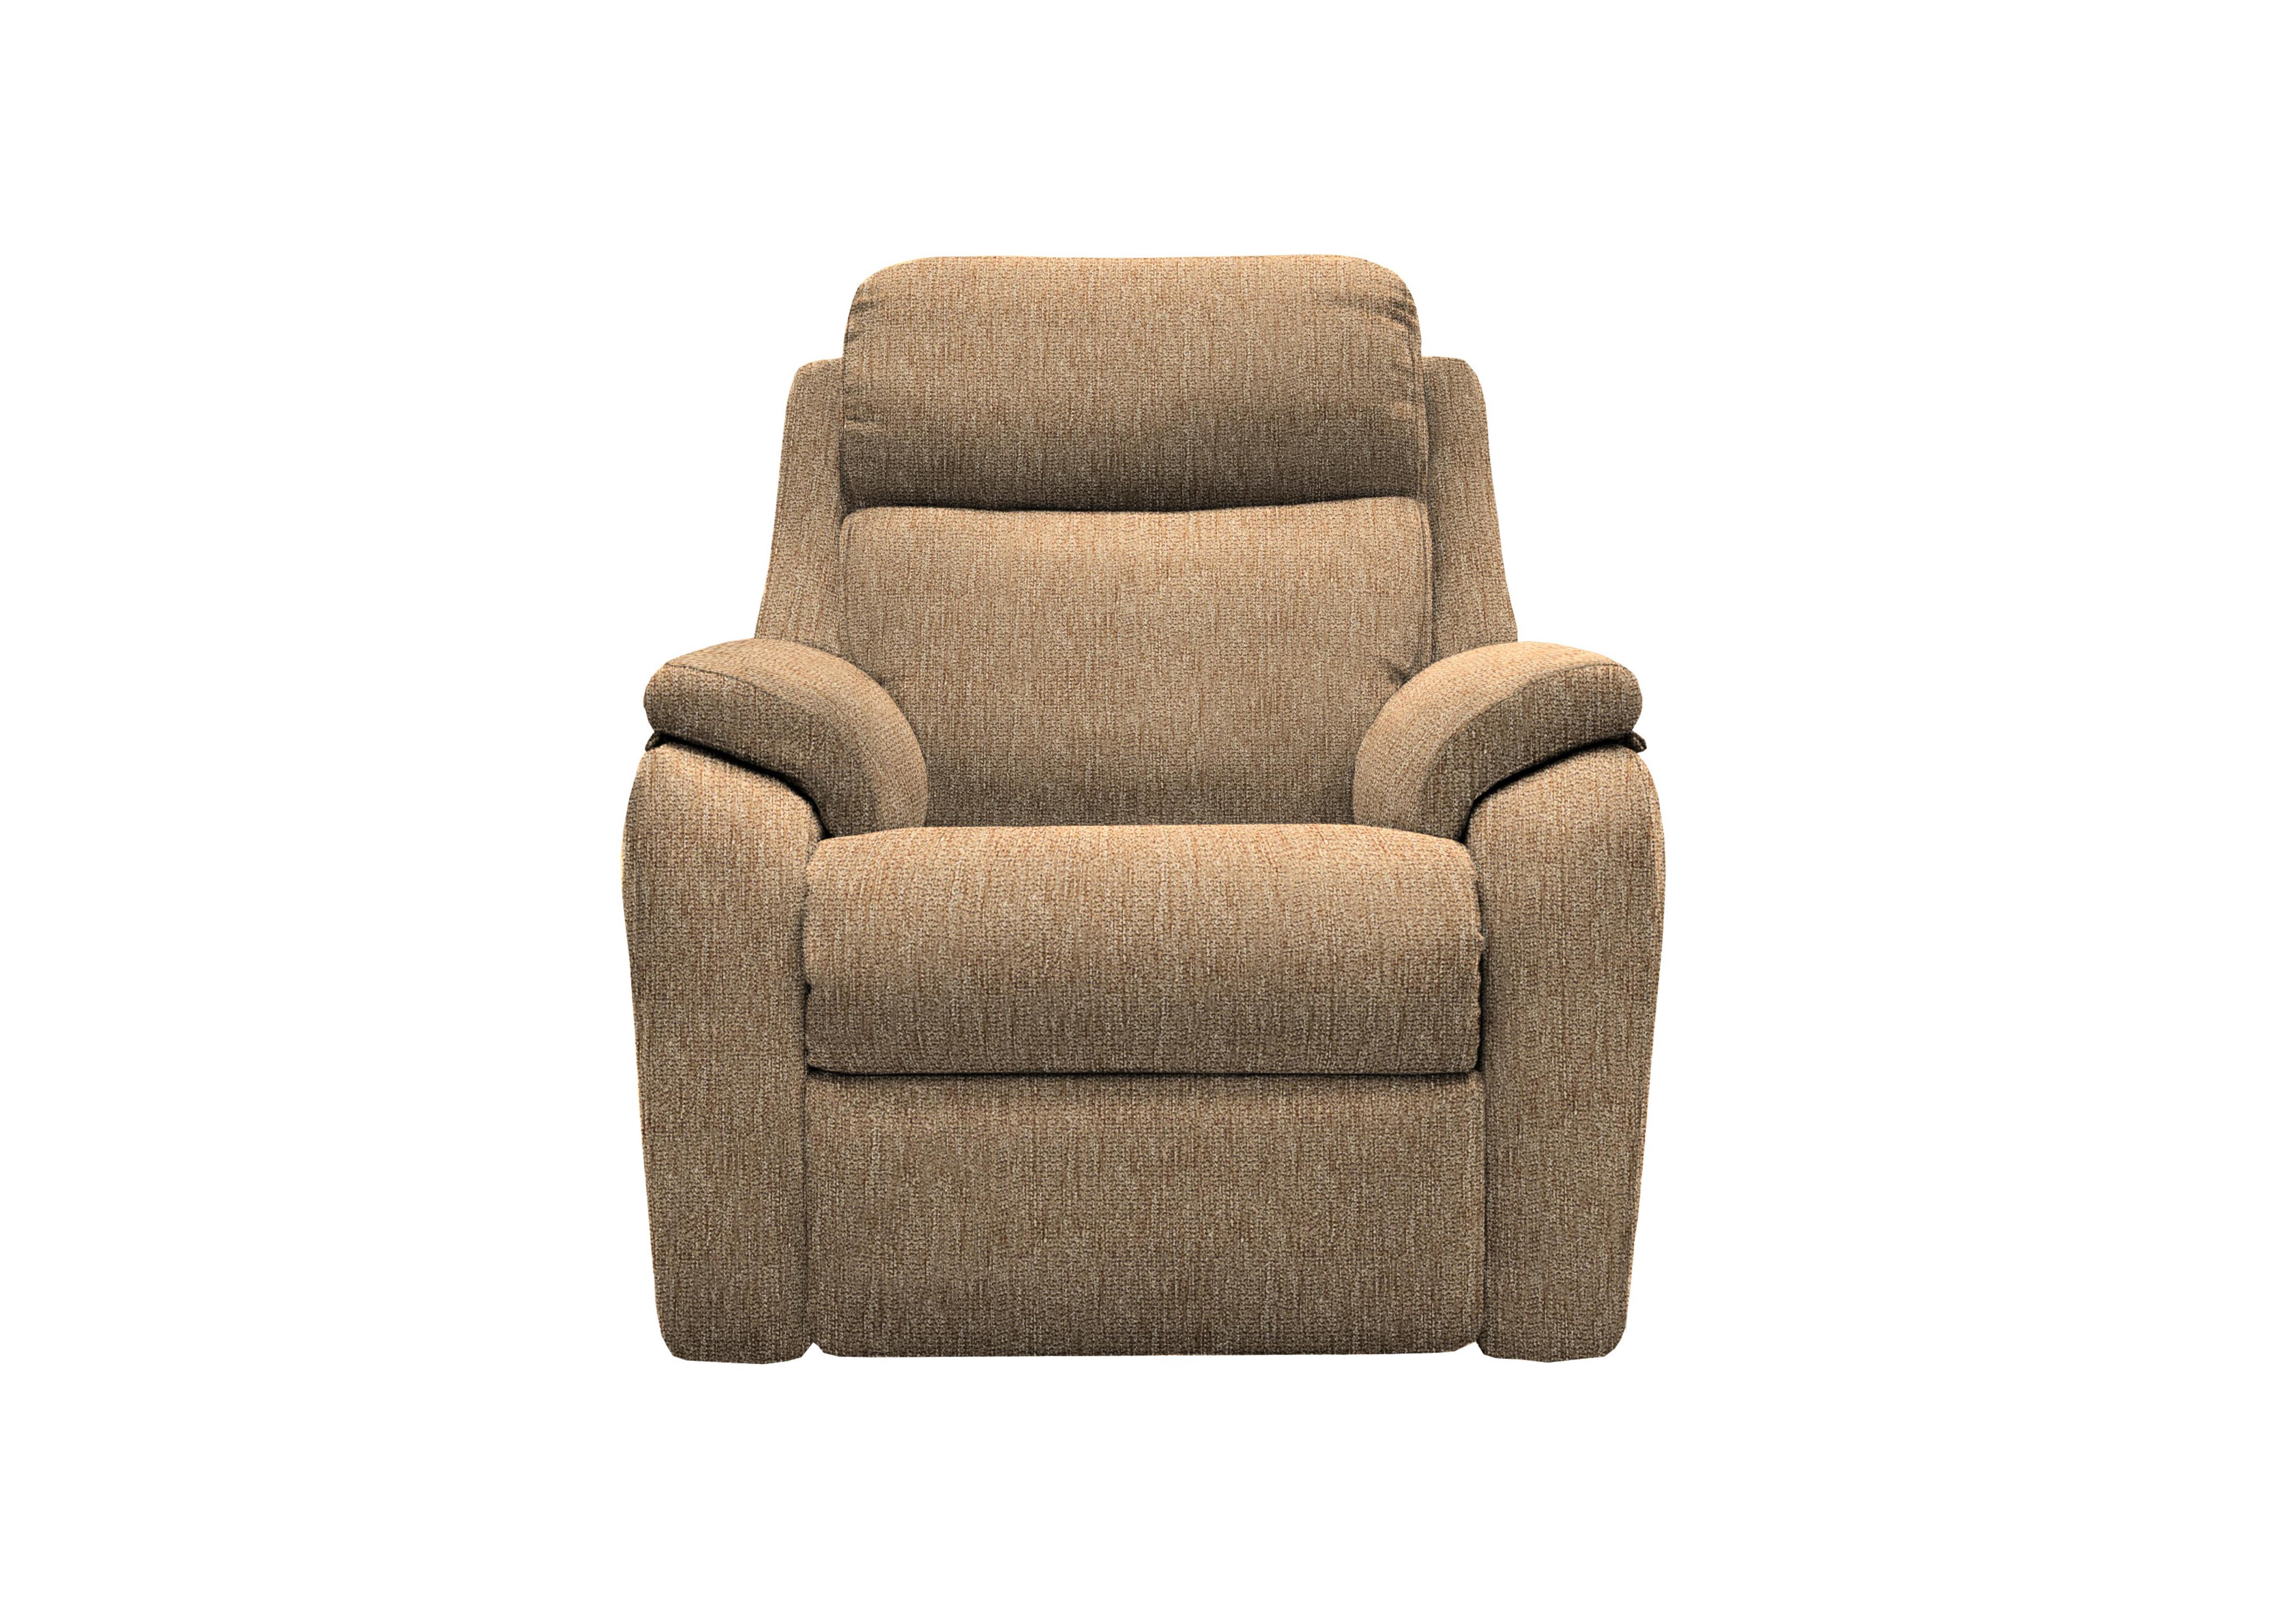 Kingsbury Fabric Power Recliner Armchair with Power Headrests in A070 Boucle Cocoa on Furniture Village